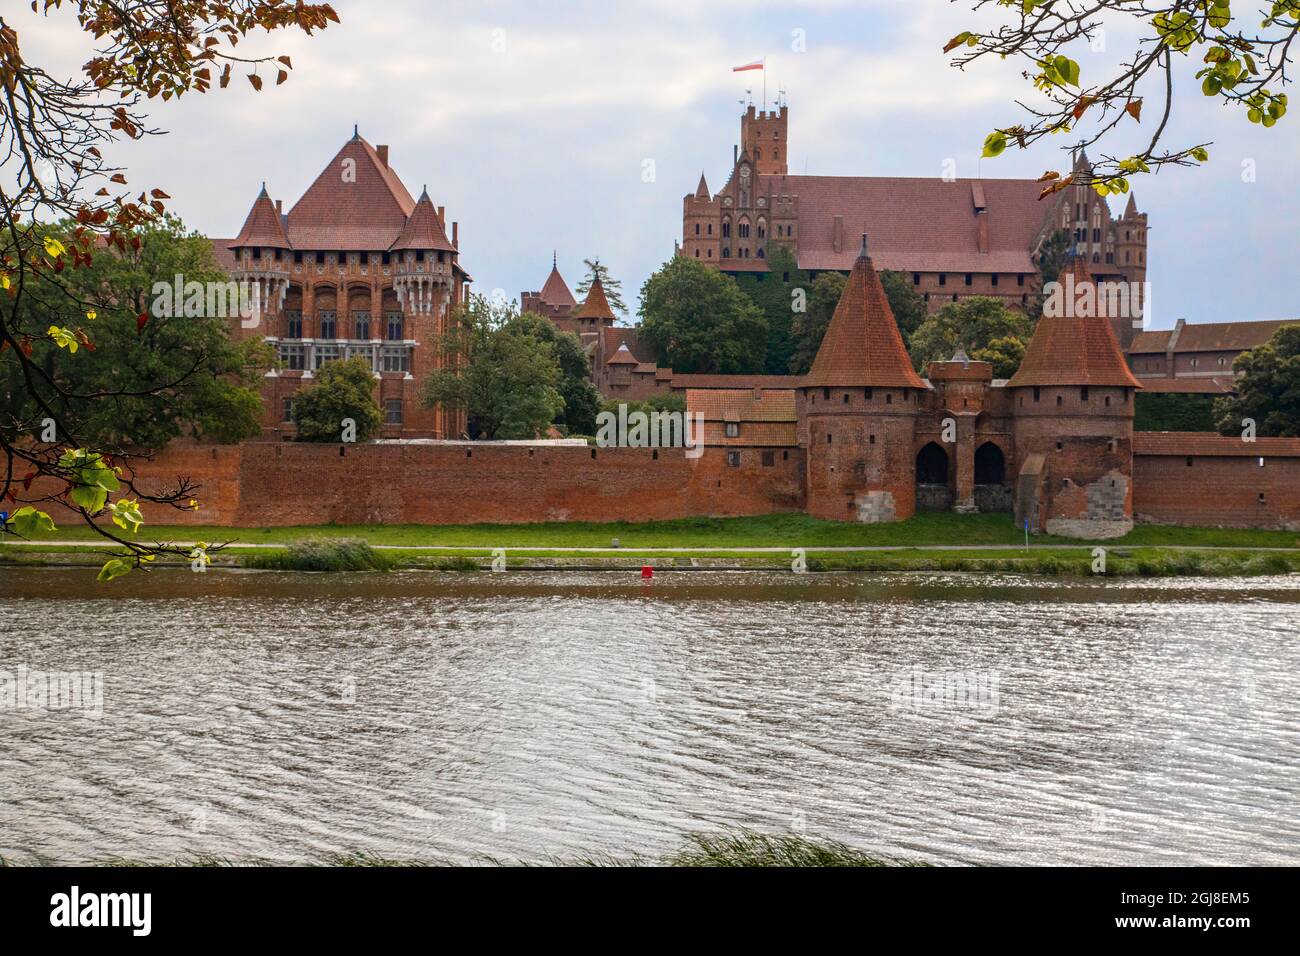 Originally built in the 13th century, Malbork was the castle of the Teutonic Knights, a German Catholic religious order of crusaders. Stock Photo